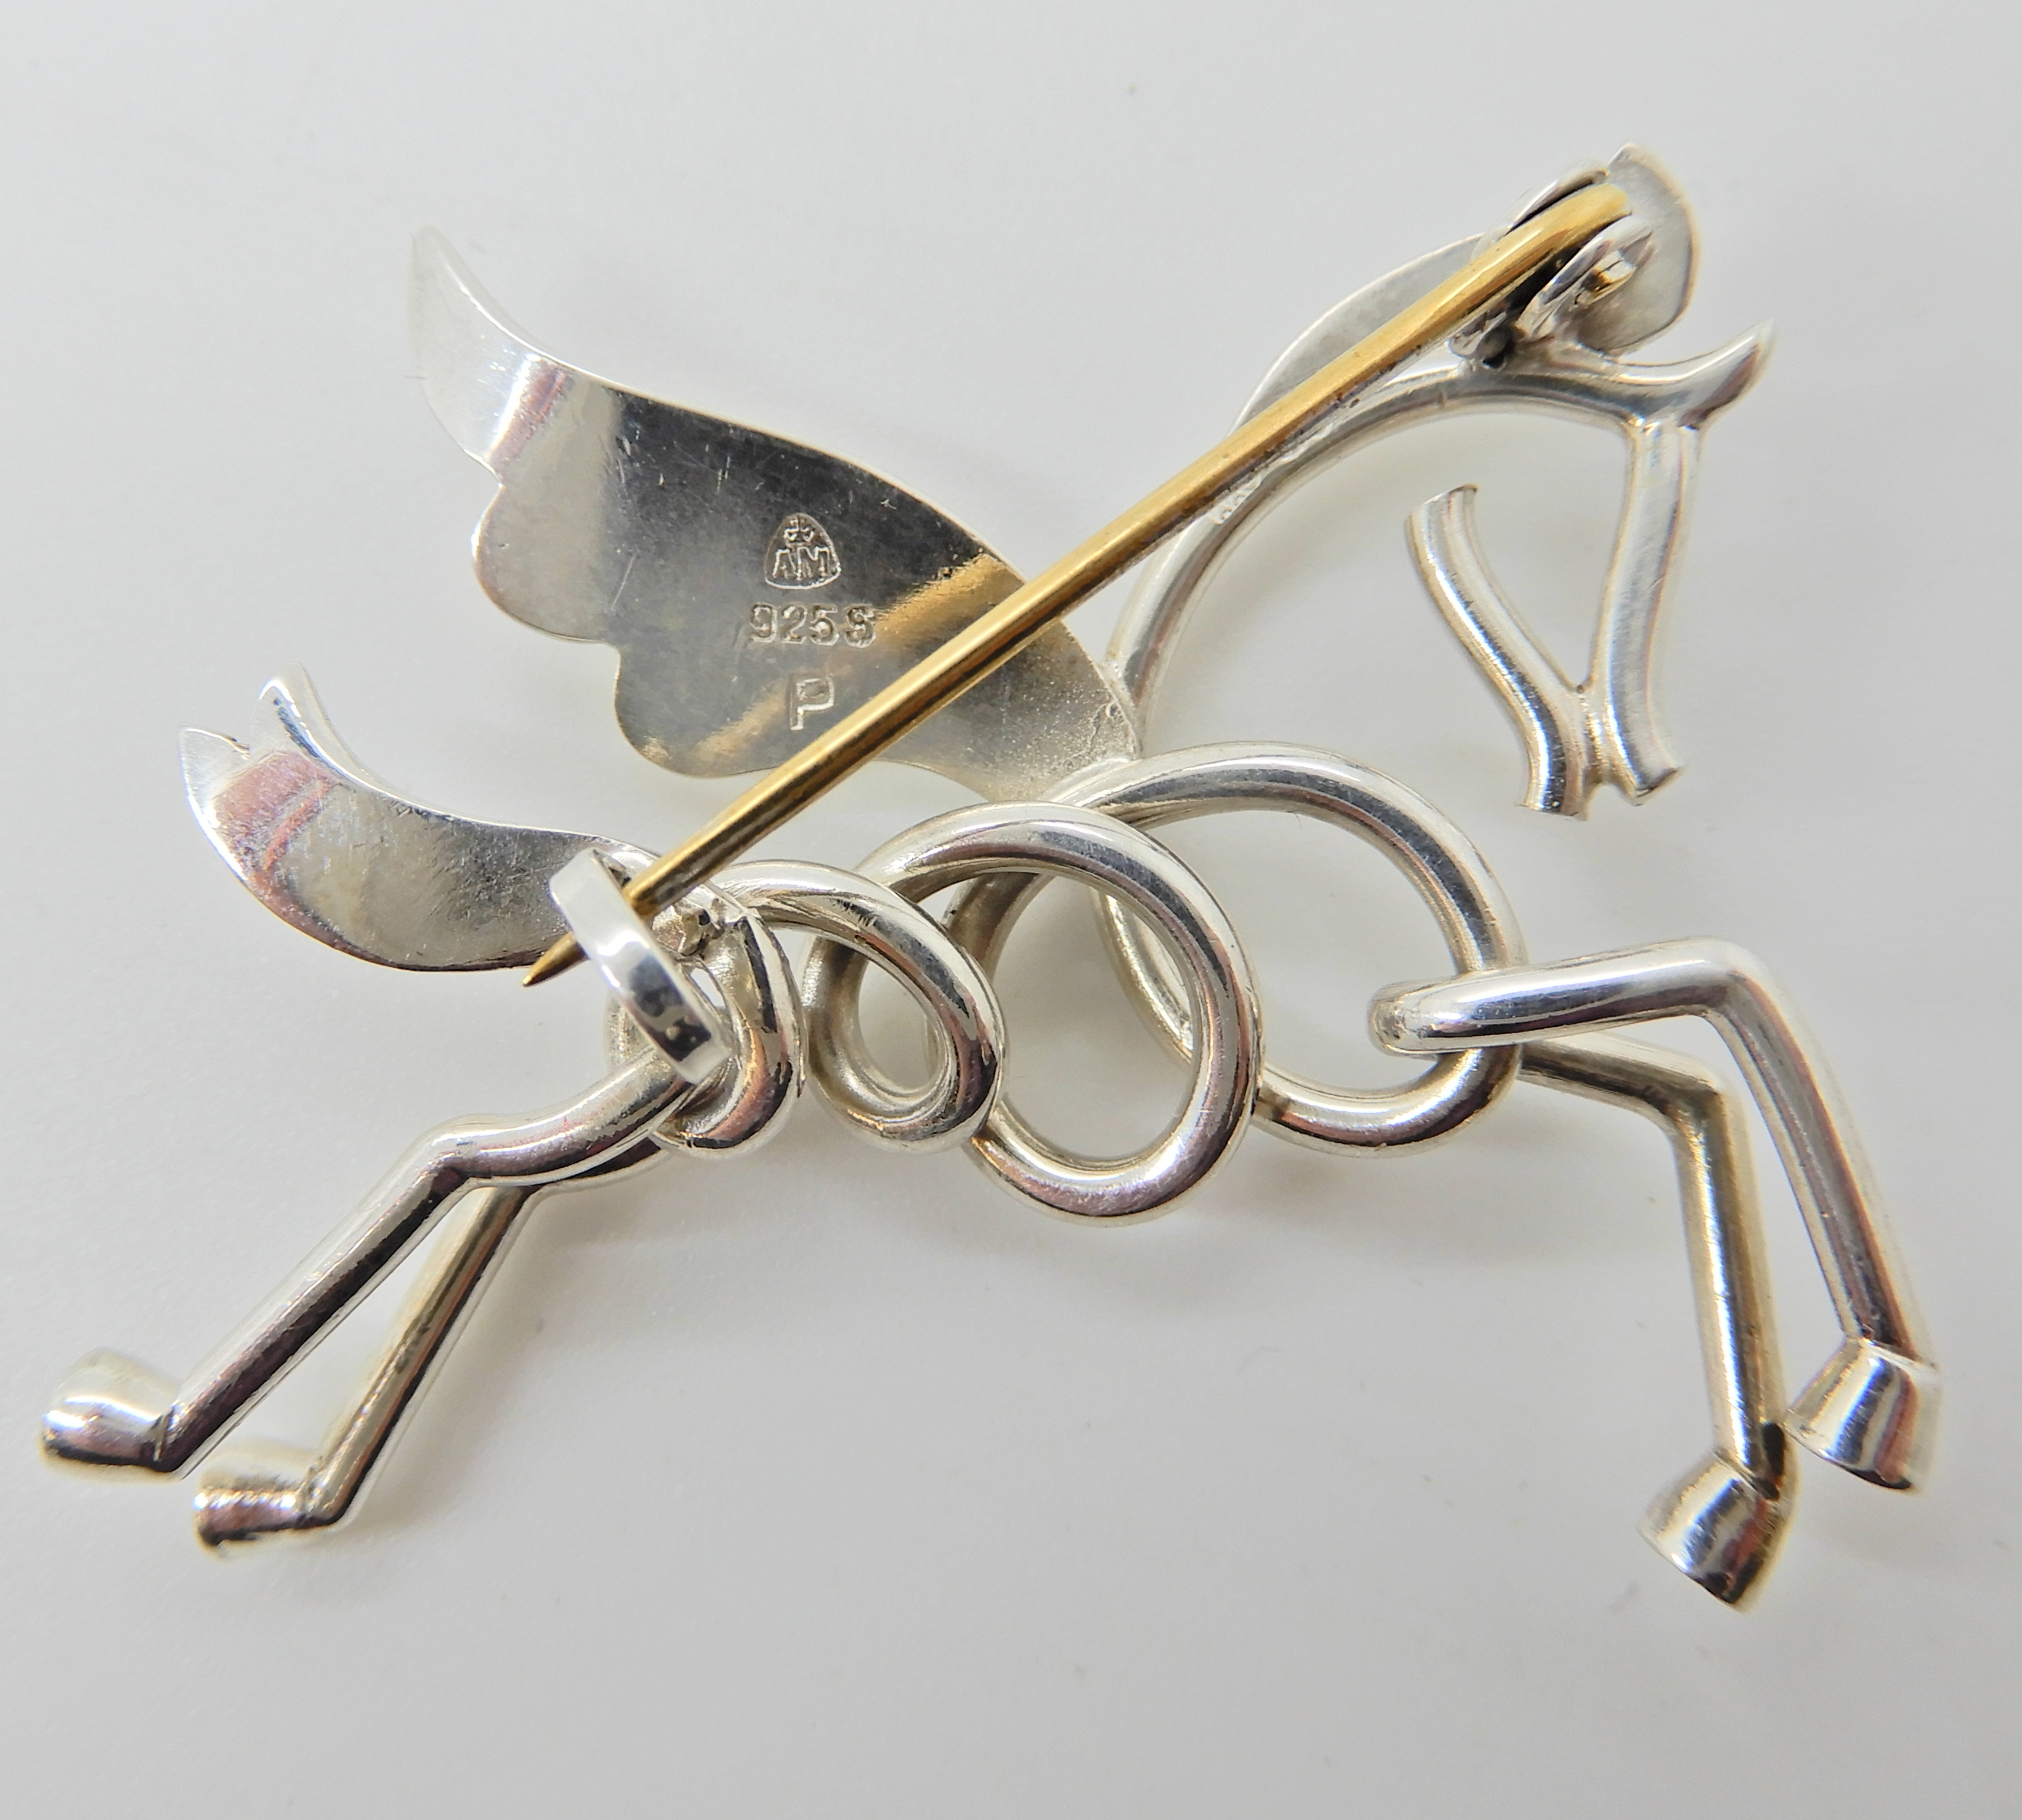 An Anton Michelsen silver Pegasus brooch, dimensions 3.8cm x 3cm, weight 5.3gms - Image 2 of 2